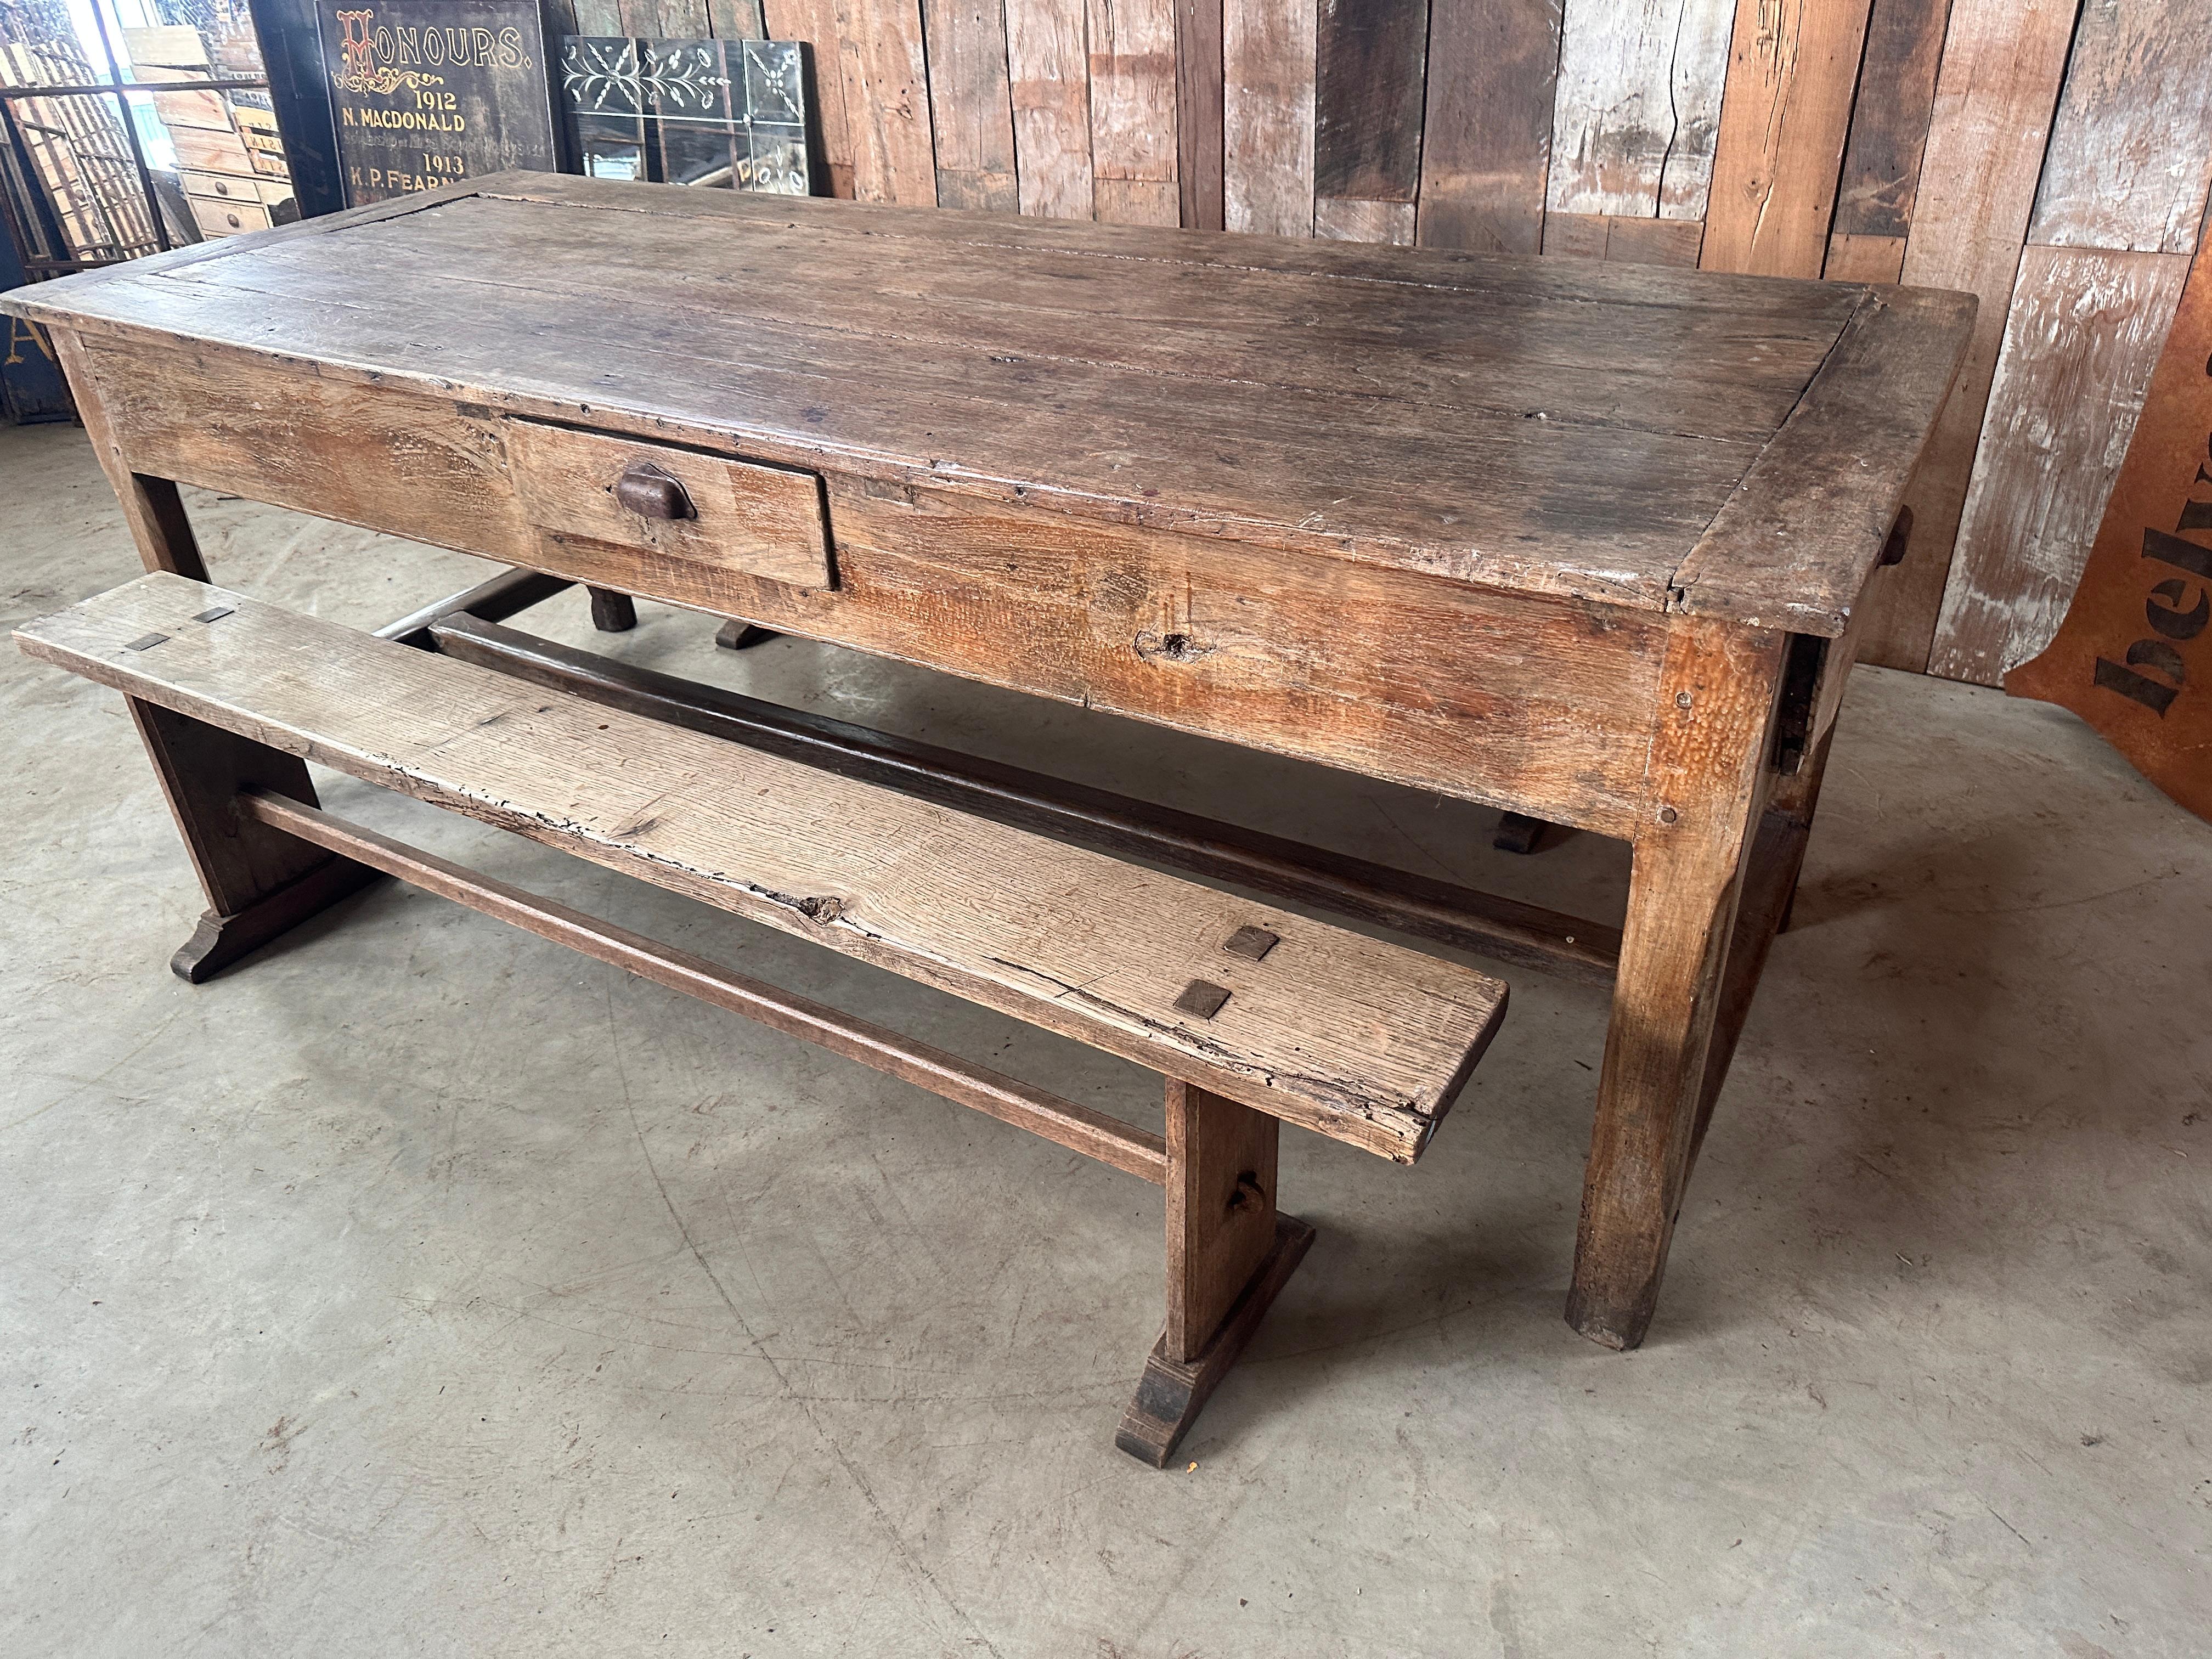 Antique French Chestnut Farmhouse Dordogne Refectory Dining Table and Benches, c 1850. L222

Truly exceptional French Chestnut farmhouse table, with matching benches, from the Perigord/Dordogne region of France, dating from the mid-19 century.